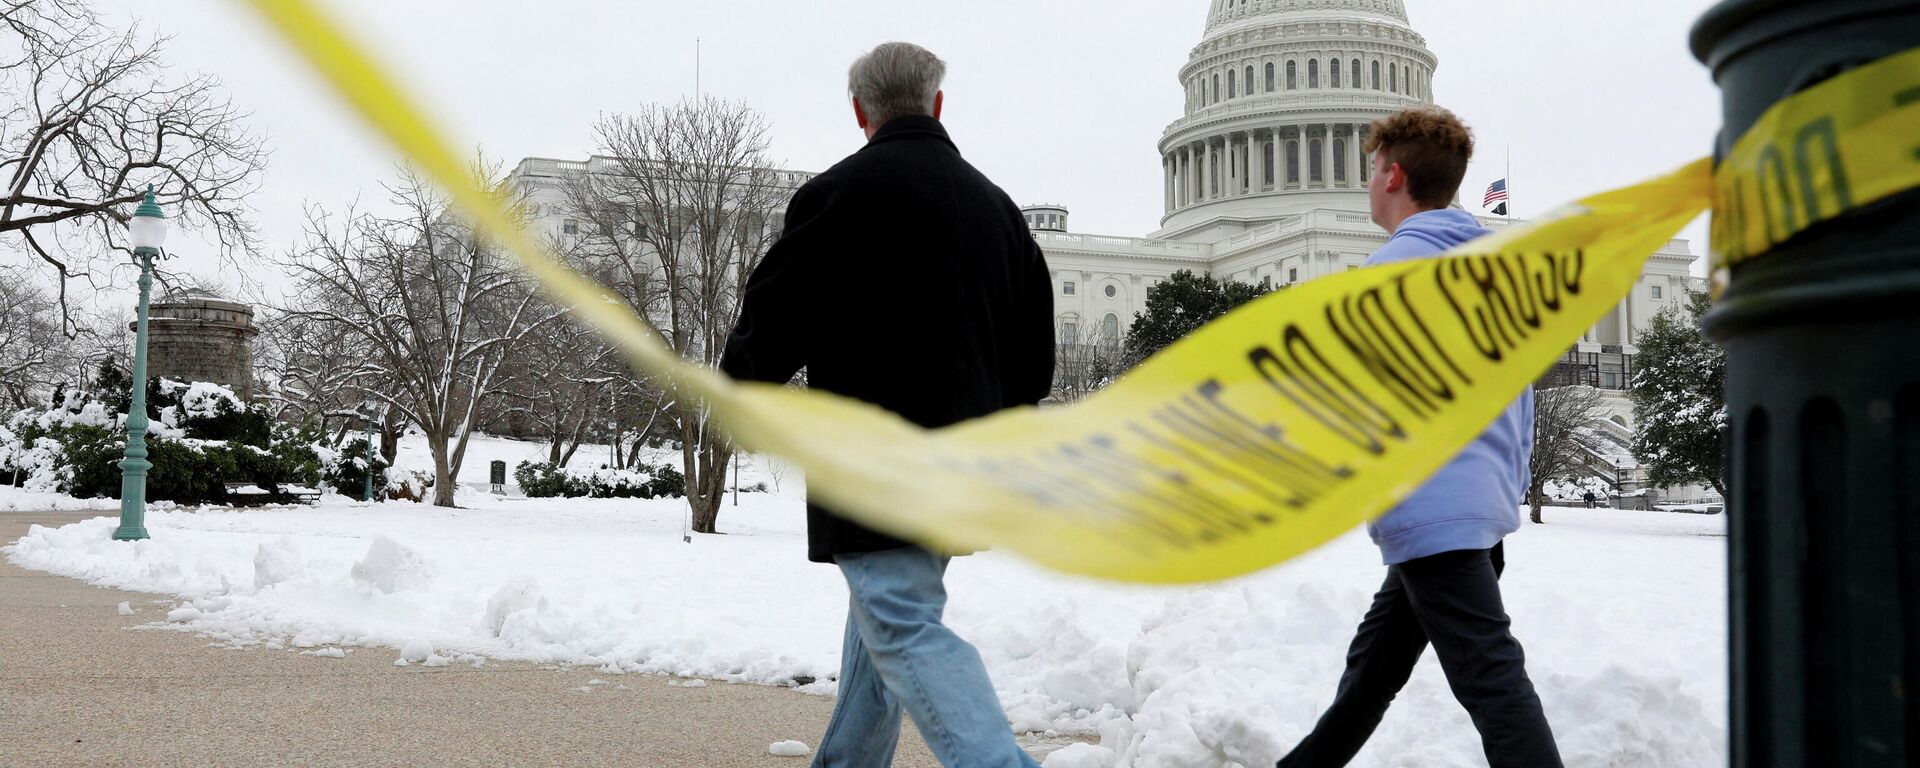 Visitors walk beside yellow police tape on the eve of the first anniversary of the January 6, 2021 attack on the U.S. Capitol, on Capitol Hill in Washington - Sputnik International, 1920, 05.01.2022